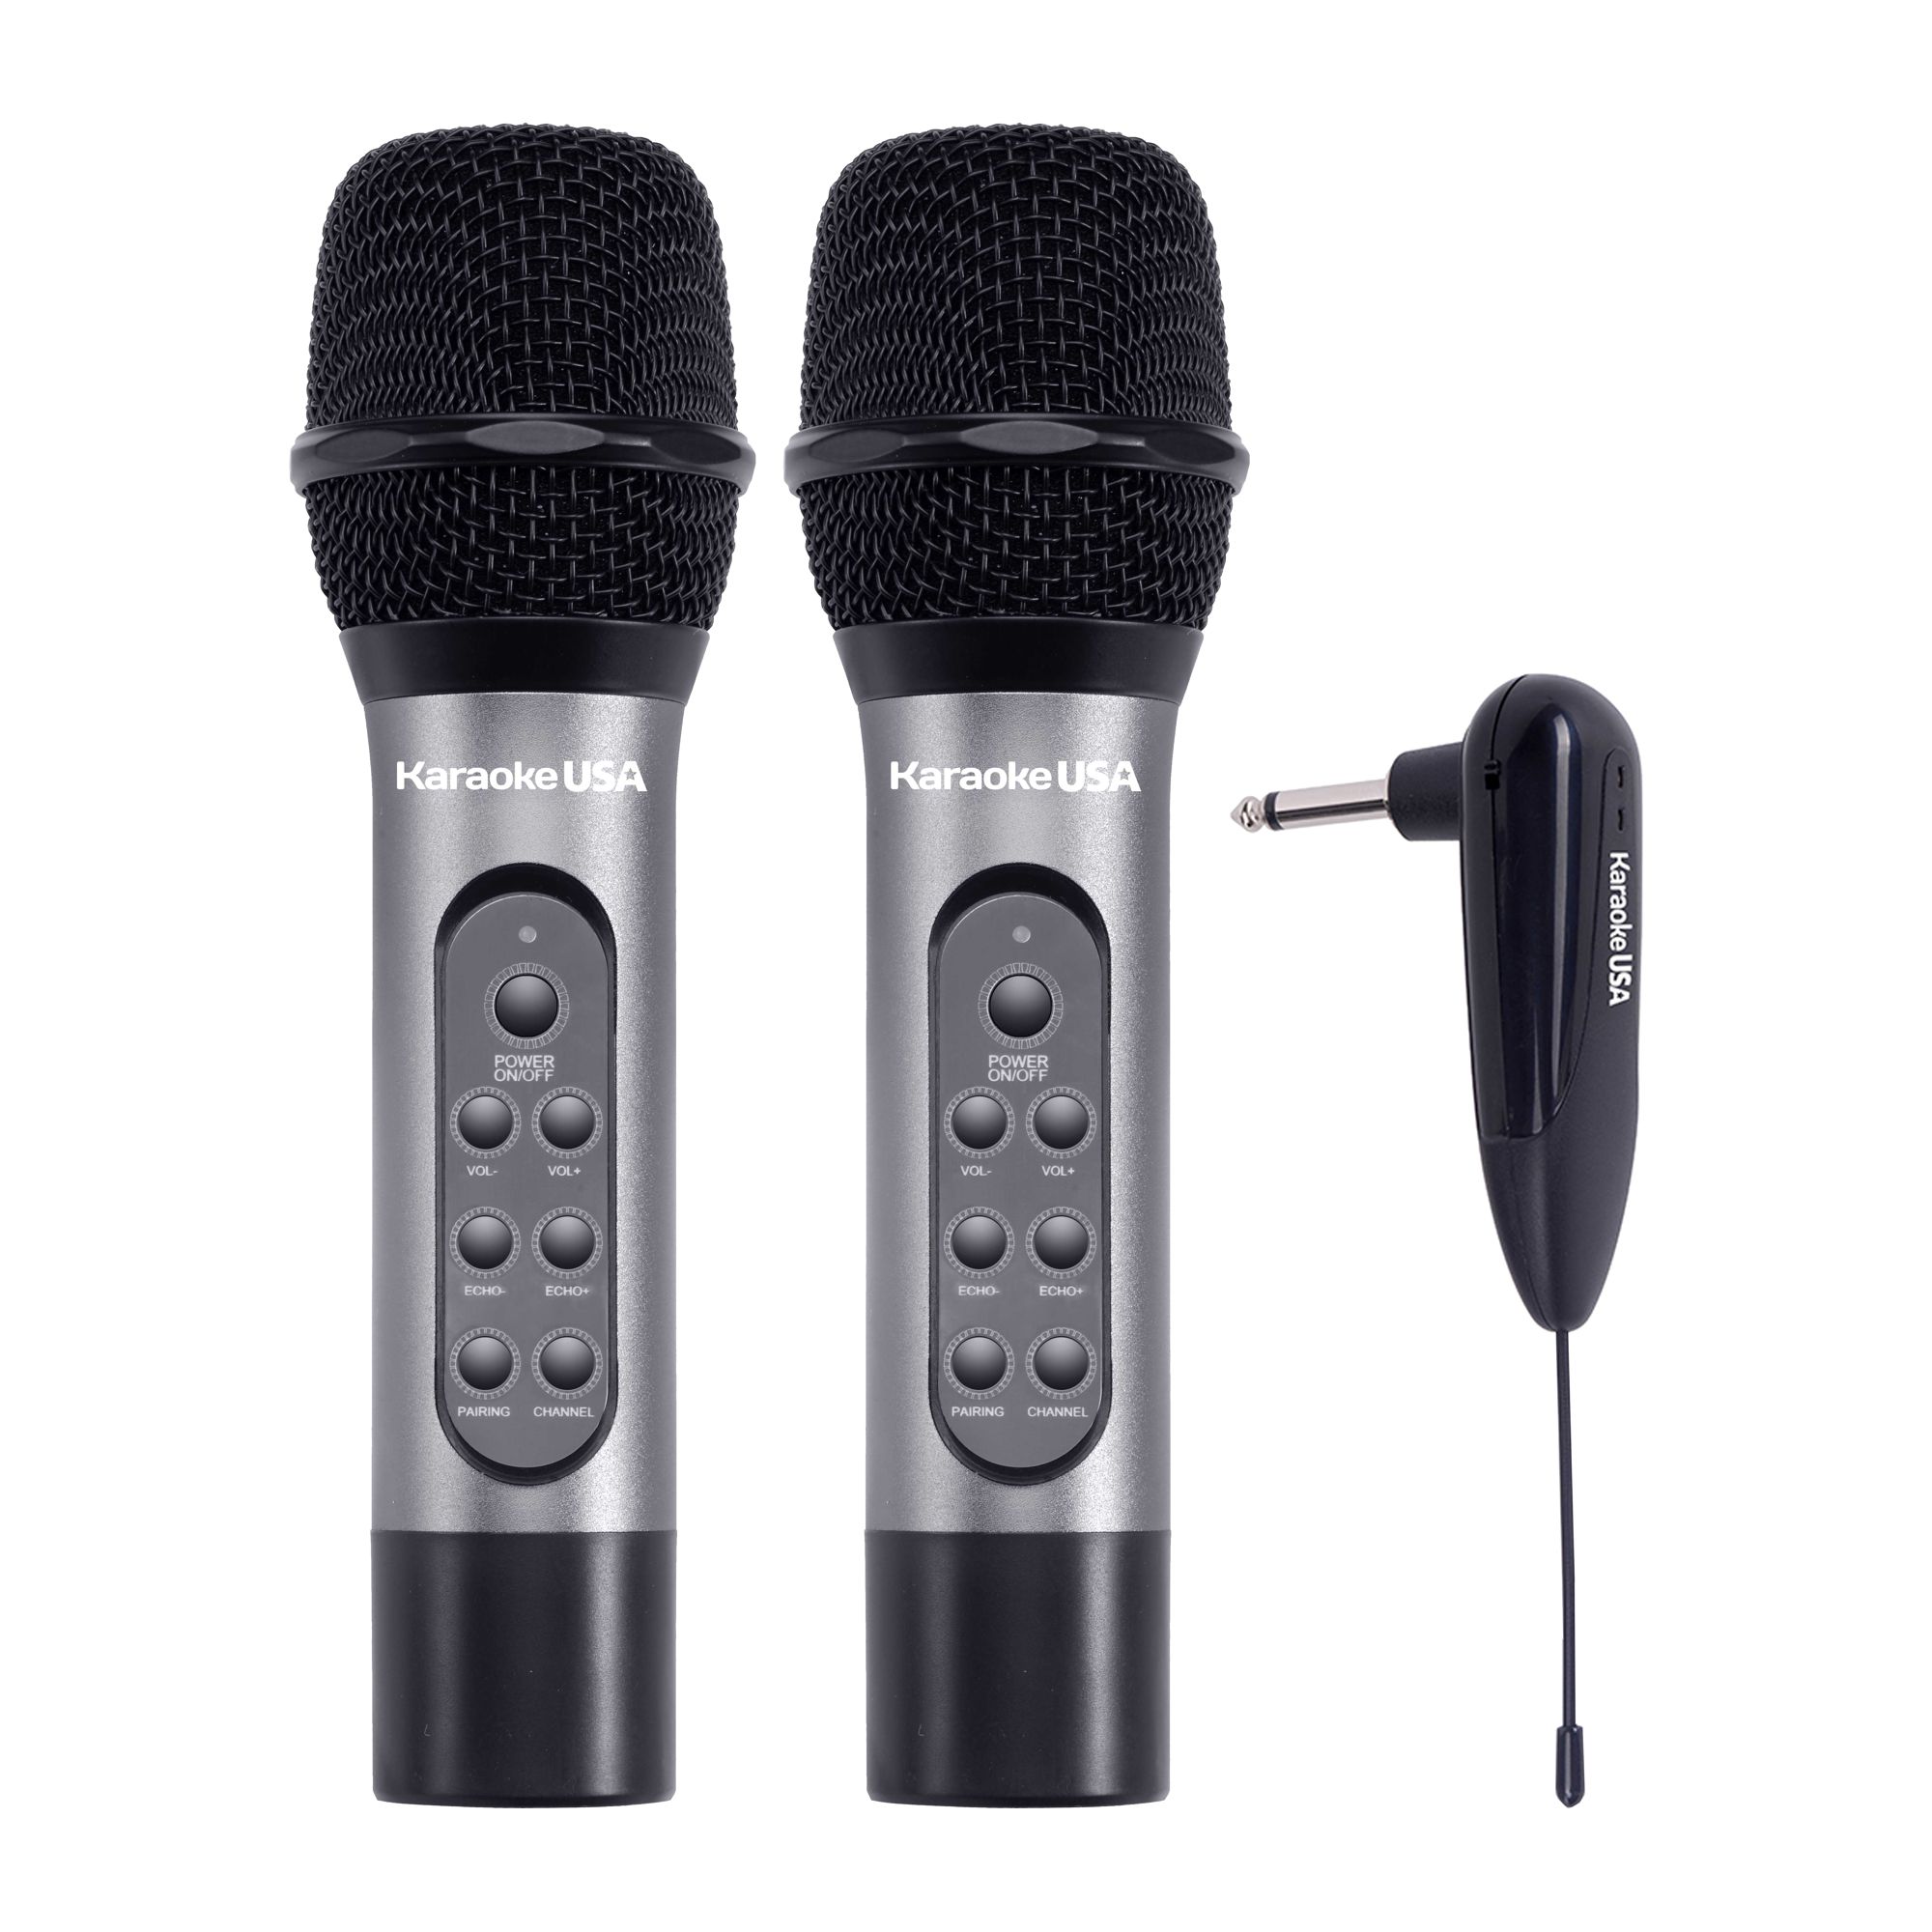 WM906 - WM906 Professional Dual UHF Wireless Microphones with Re-Chargeable Batteries